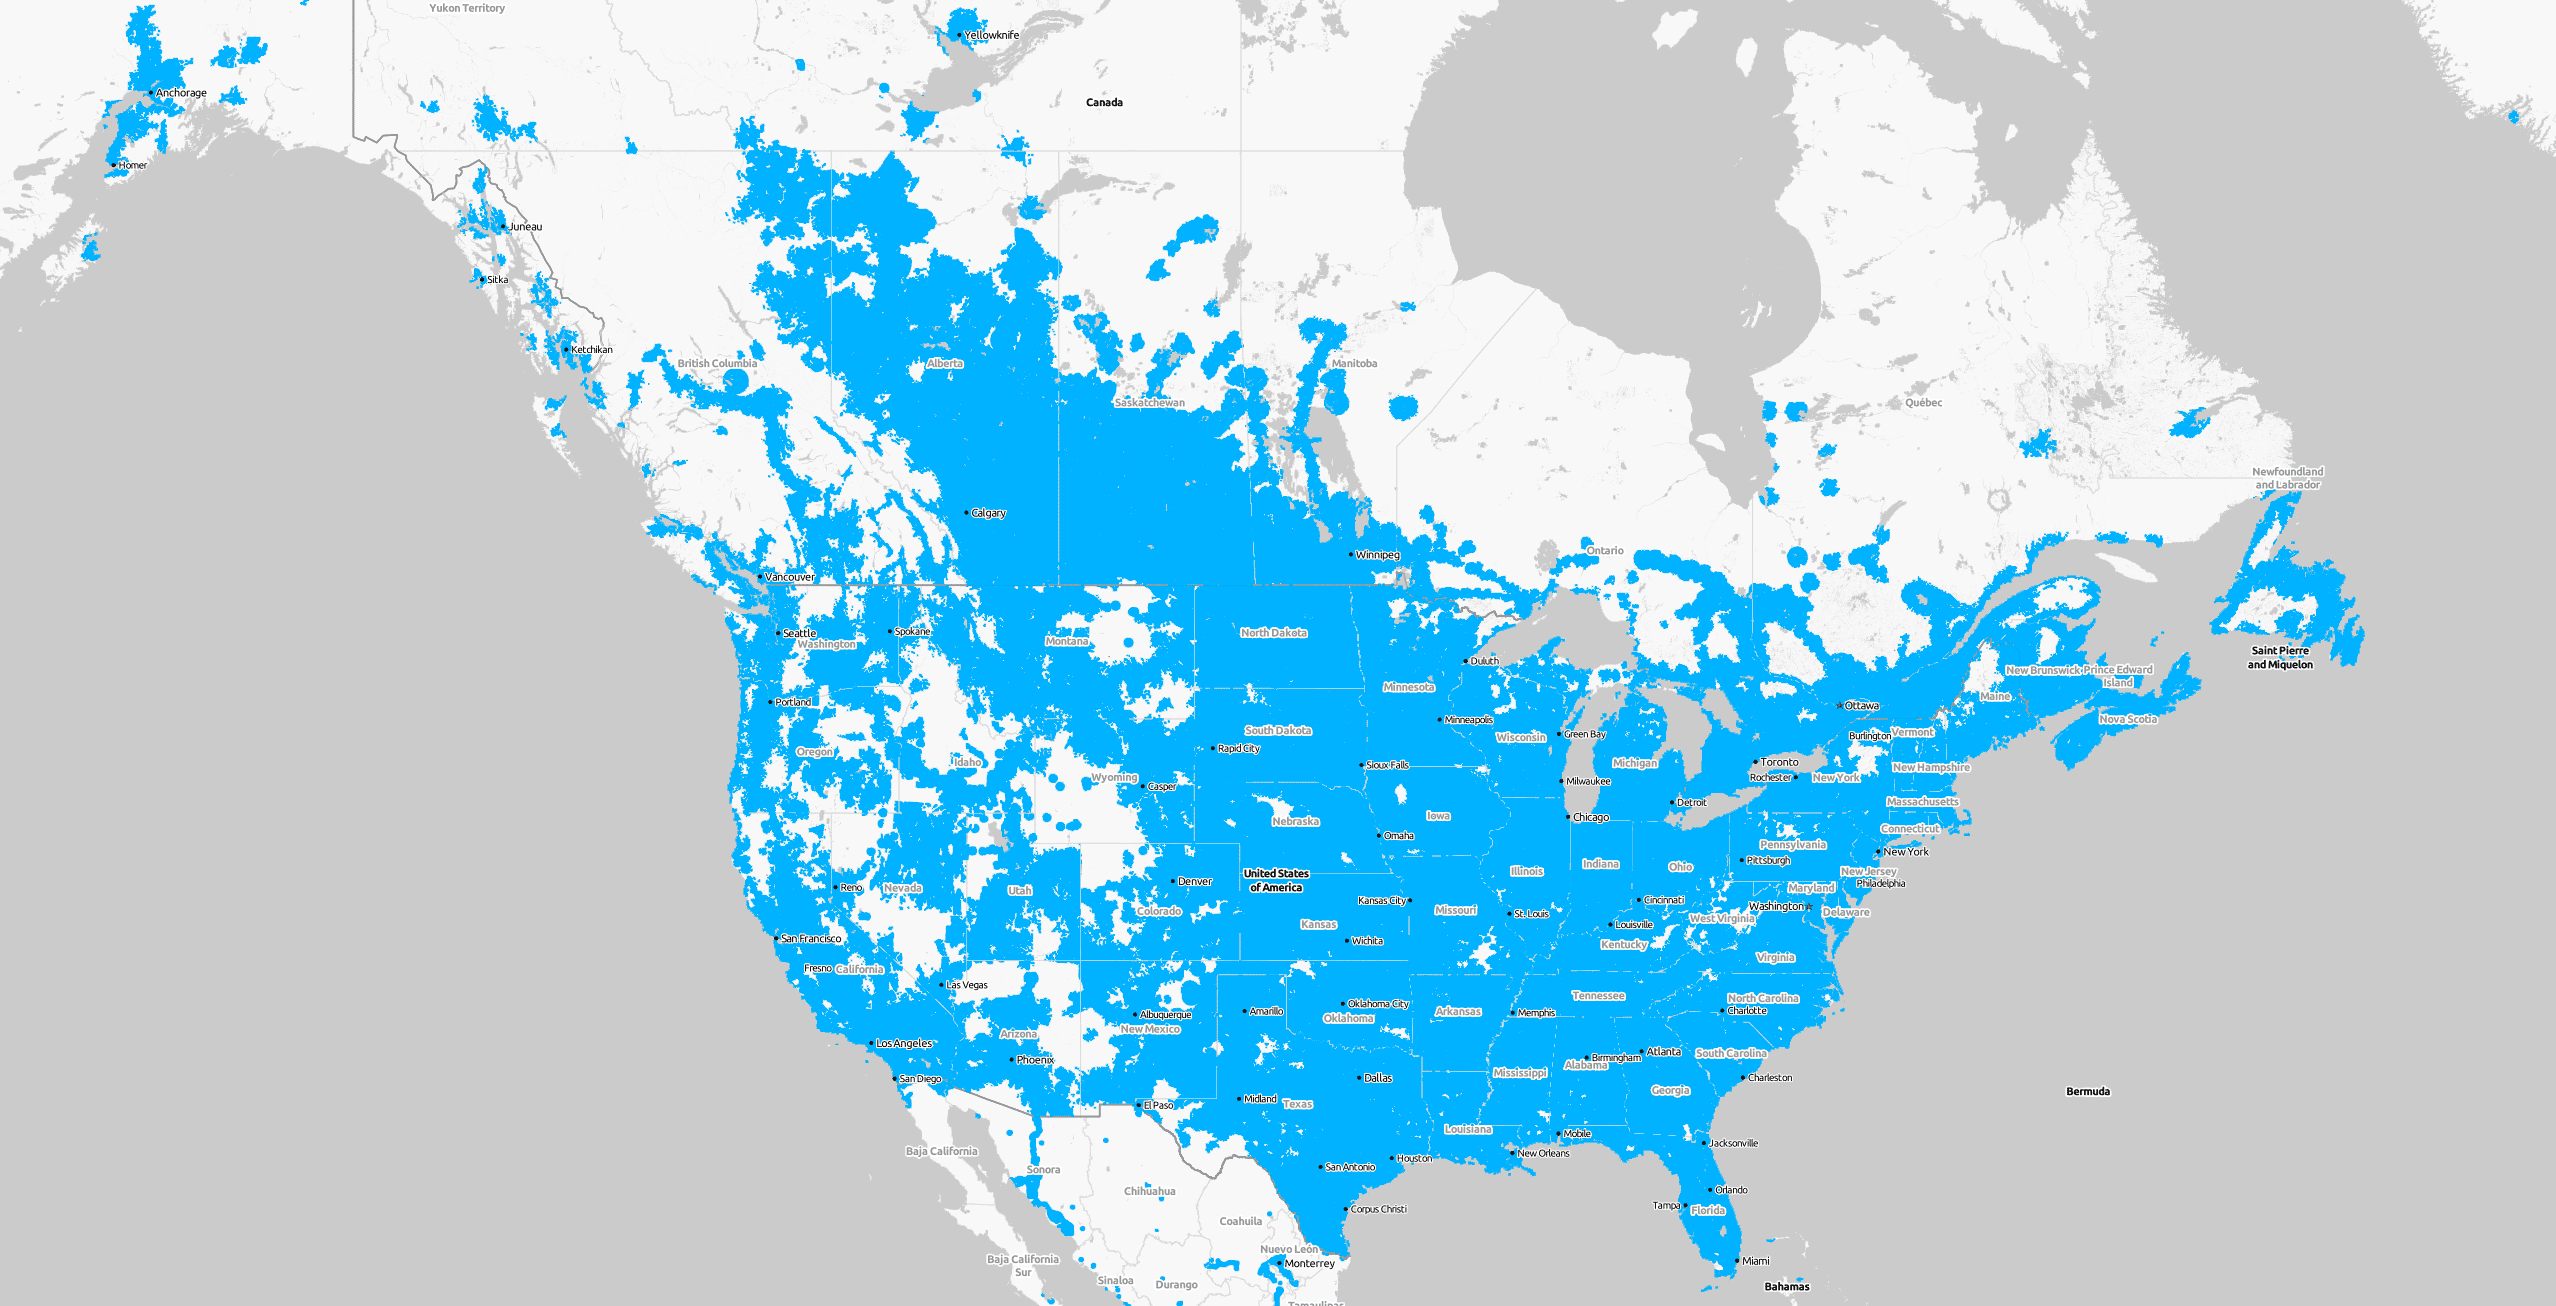 Cellular coverage map for USA and Canada